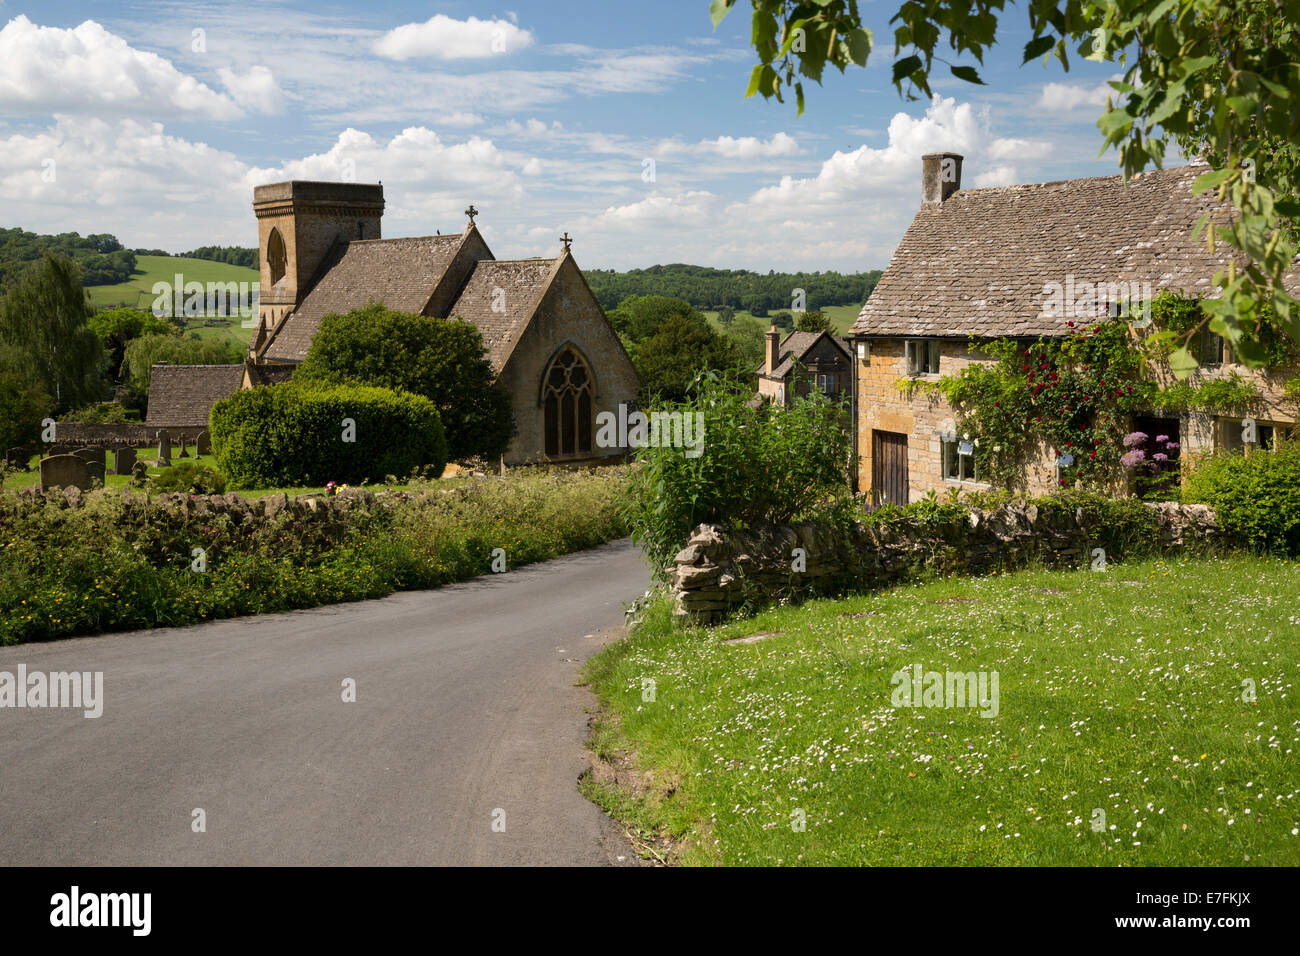 St Barnabas church and rose covered cotswold cottage, Snowshill, Cotswolds, Gloucestershire, England, United Kingdom, Europe Stock Photo